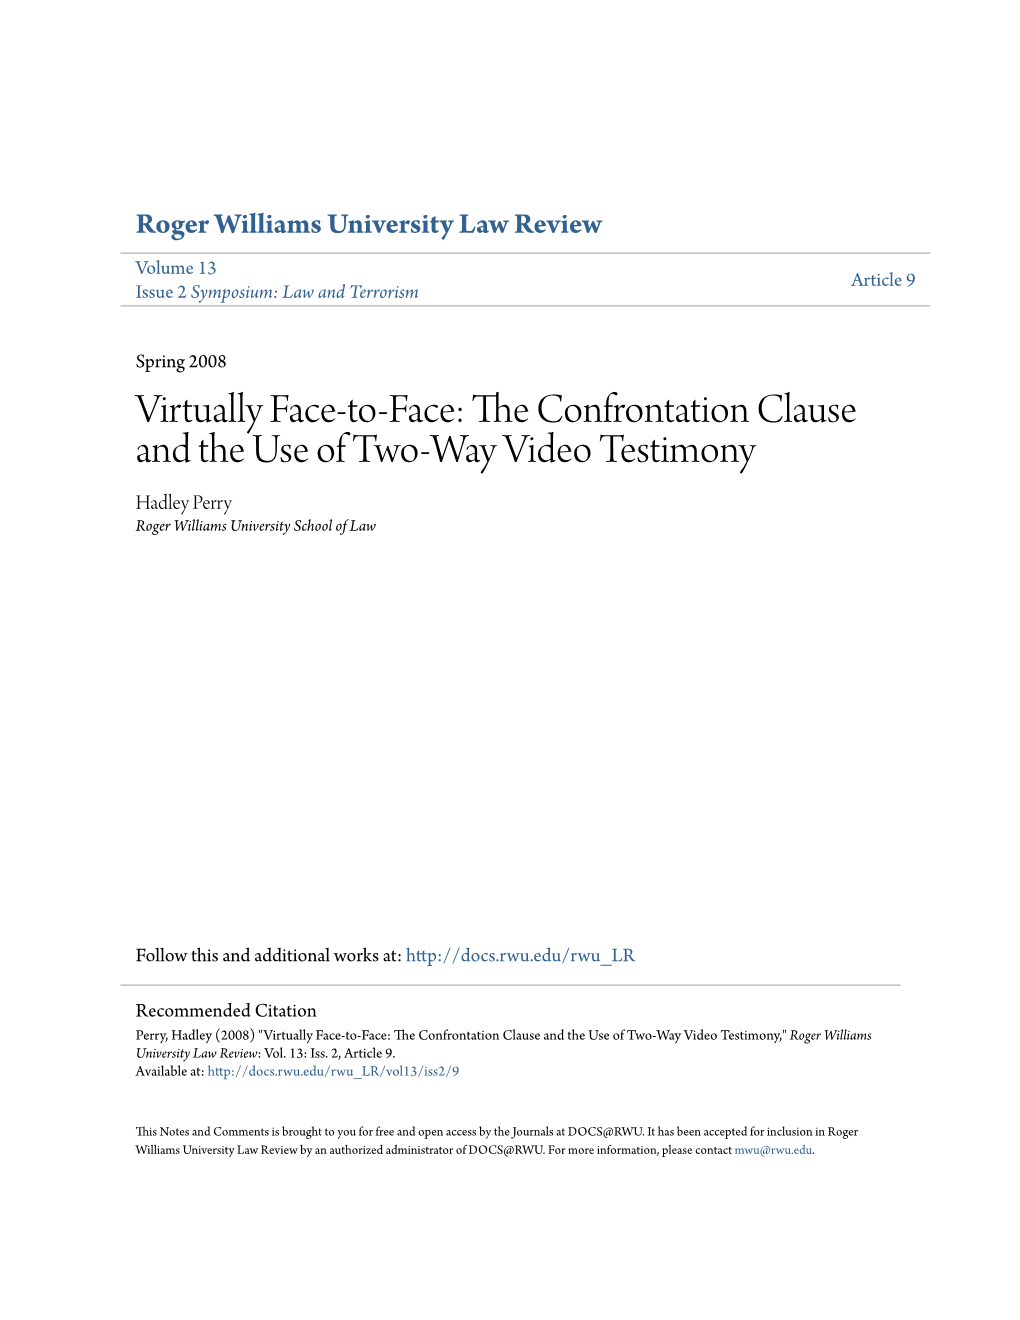 The Confrontation Clause and the Use of Two-Way Video Testimony